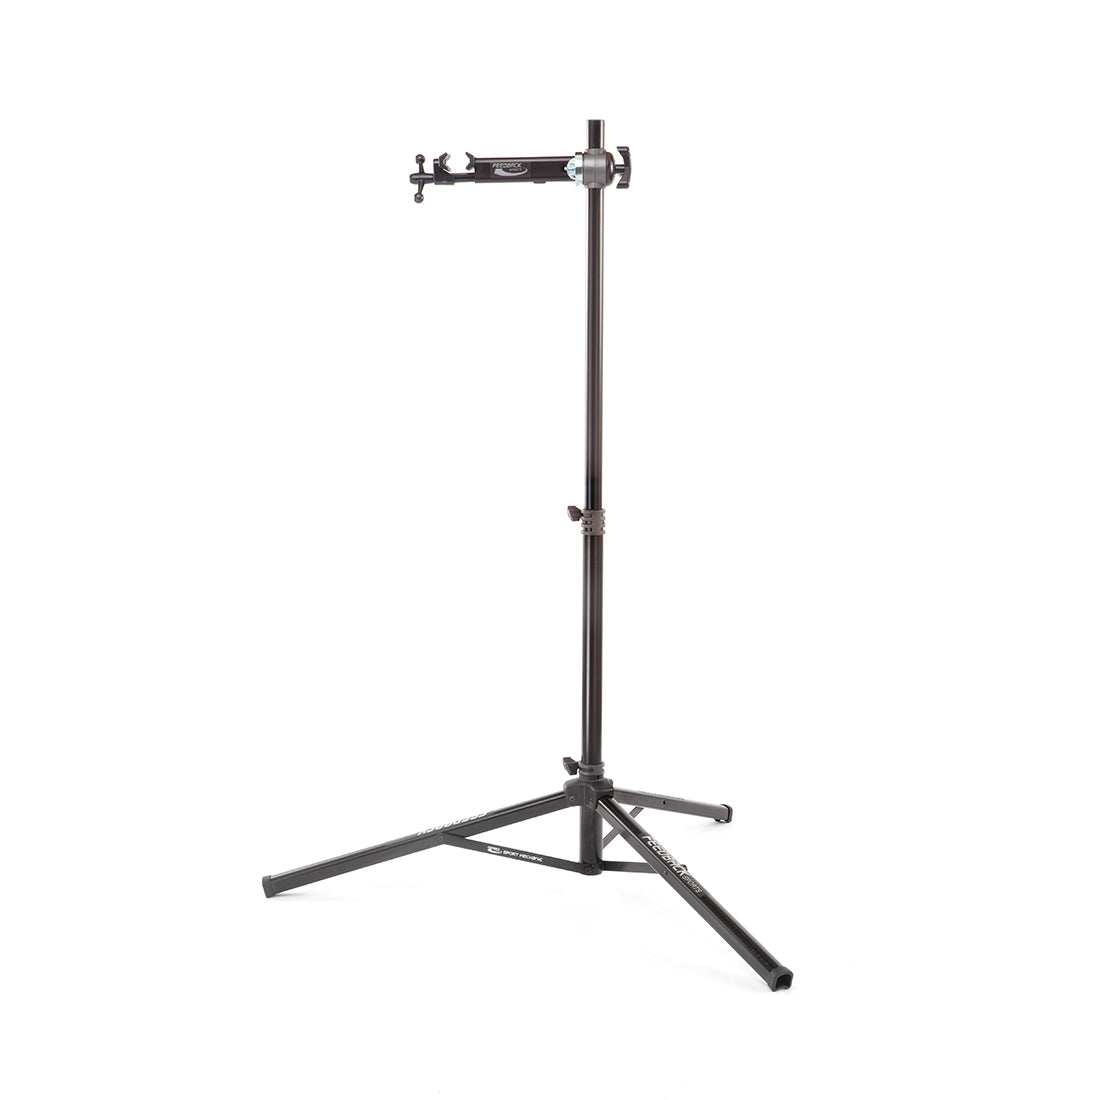 Black bike repair stand deployed for use in studio on white.